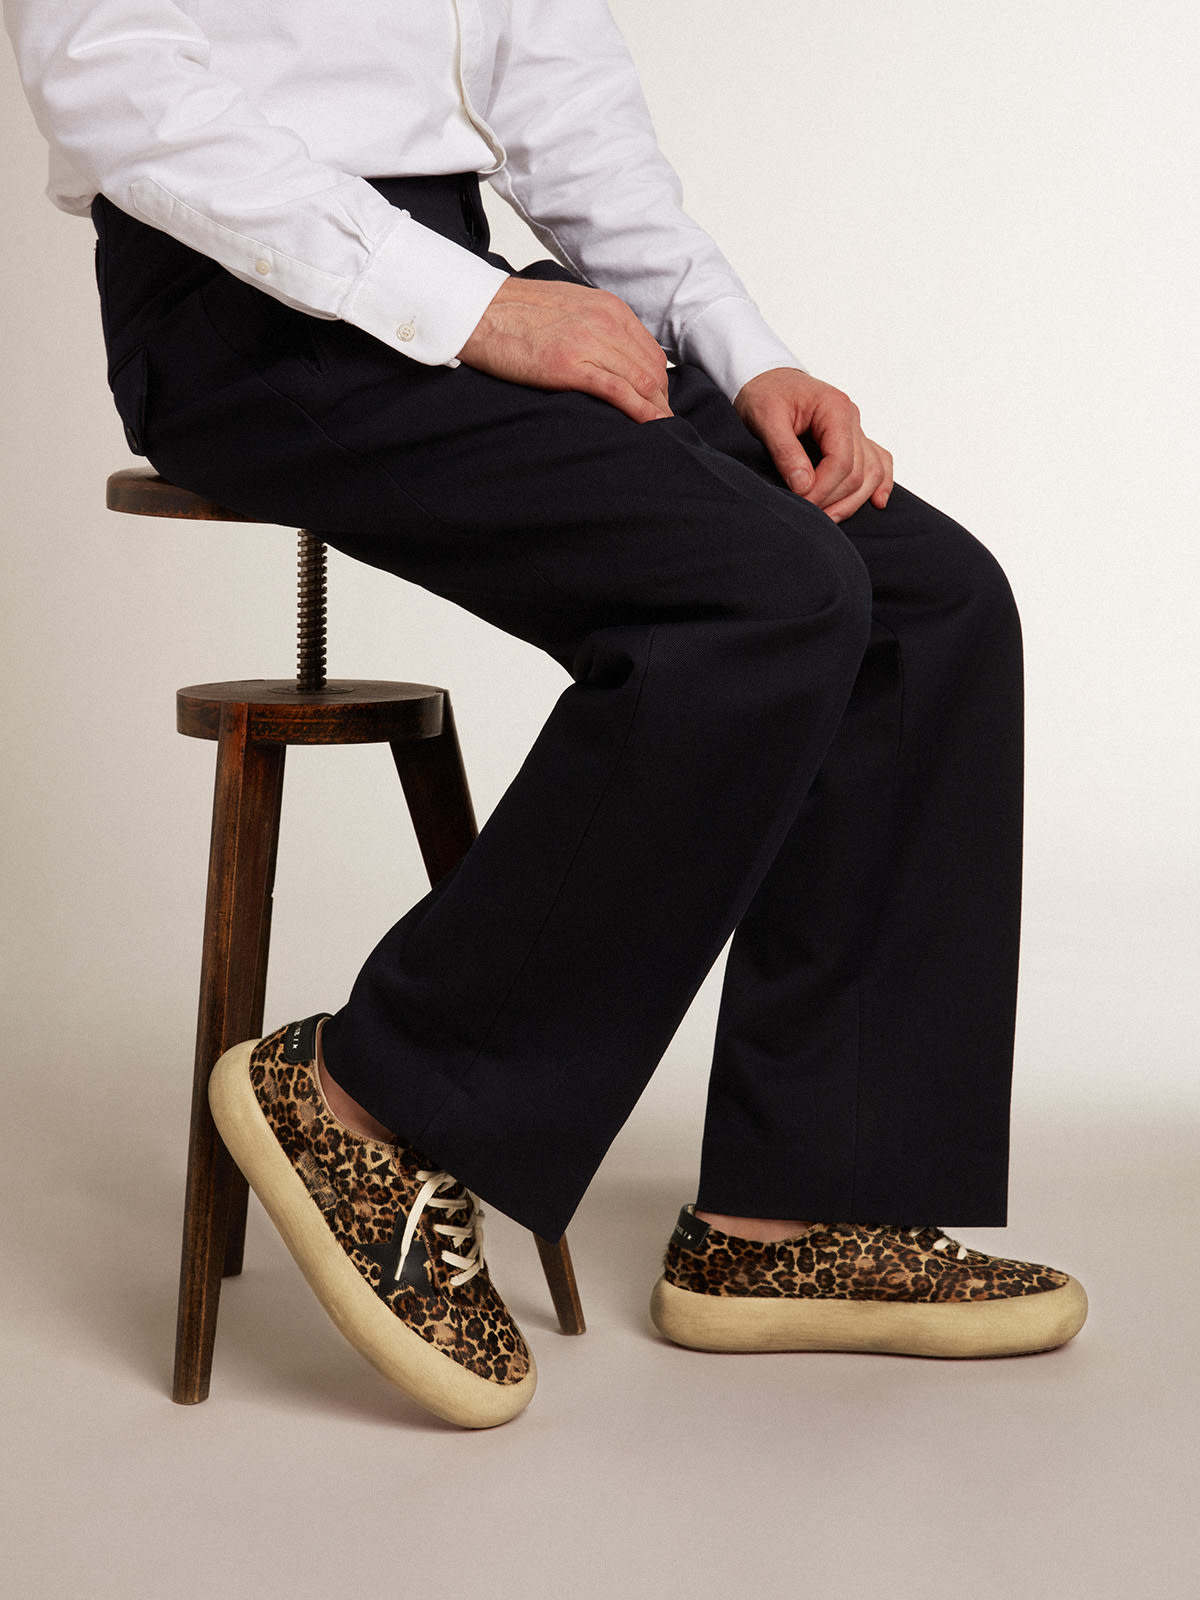 Golden Goose - Men’s Space-Star shoes in leopard-print pony skin with black leather star and heel tab in 